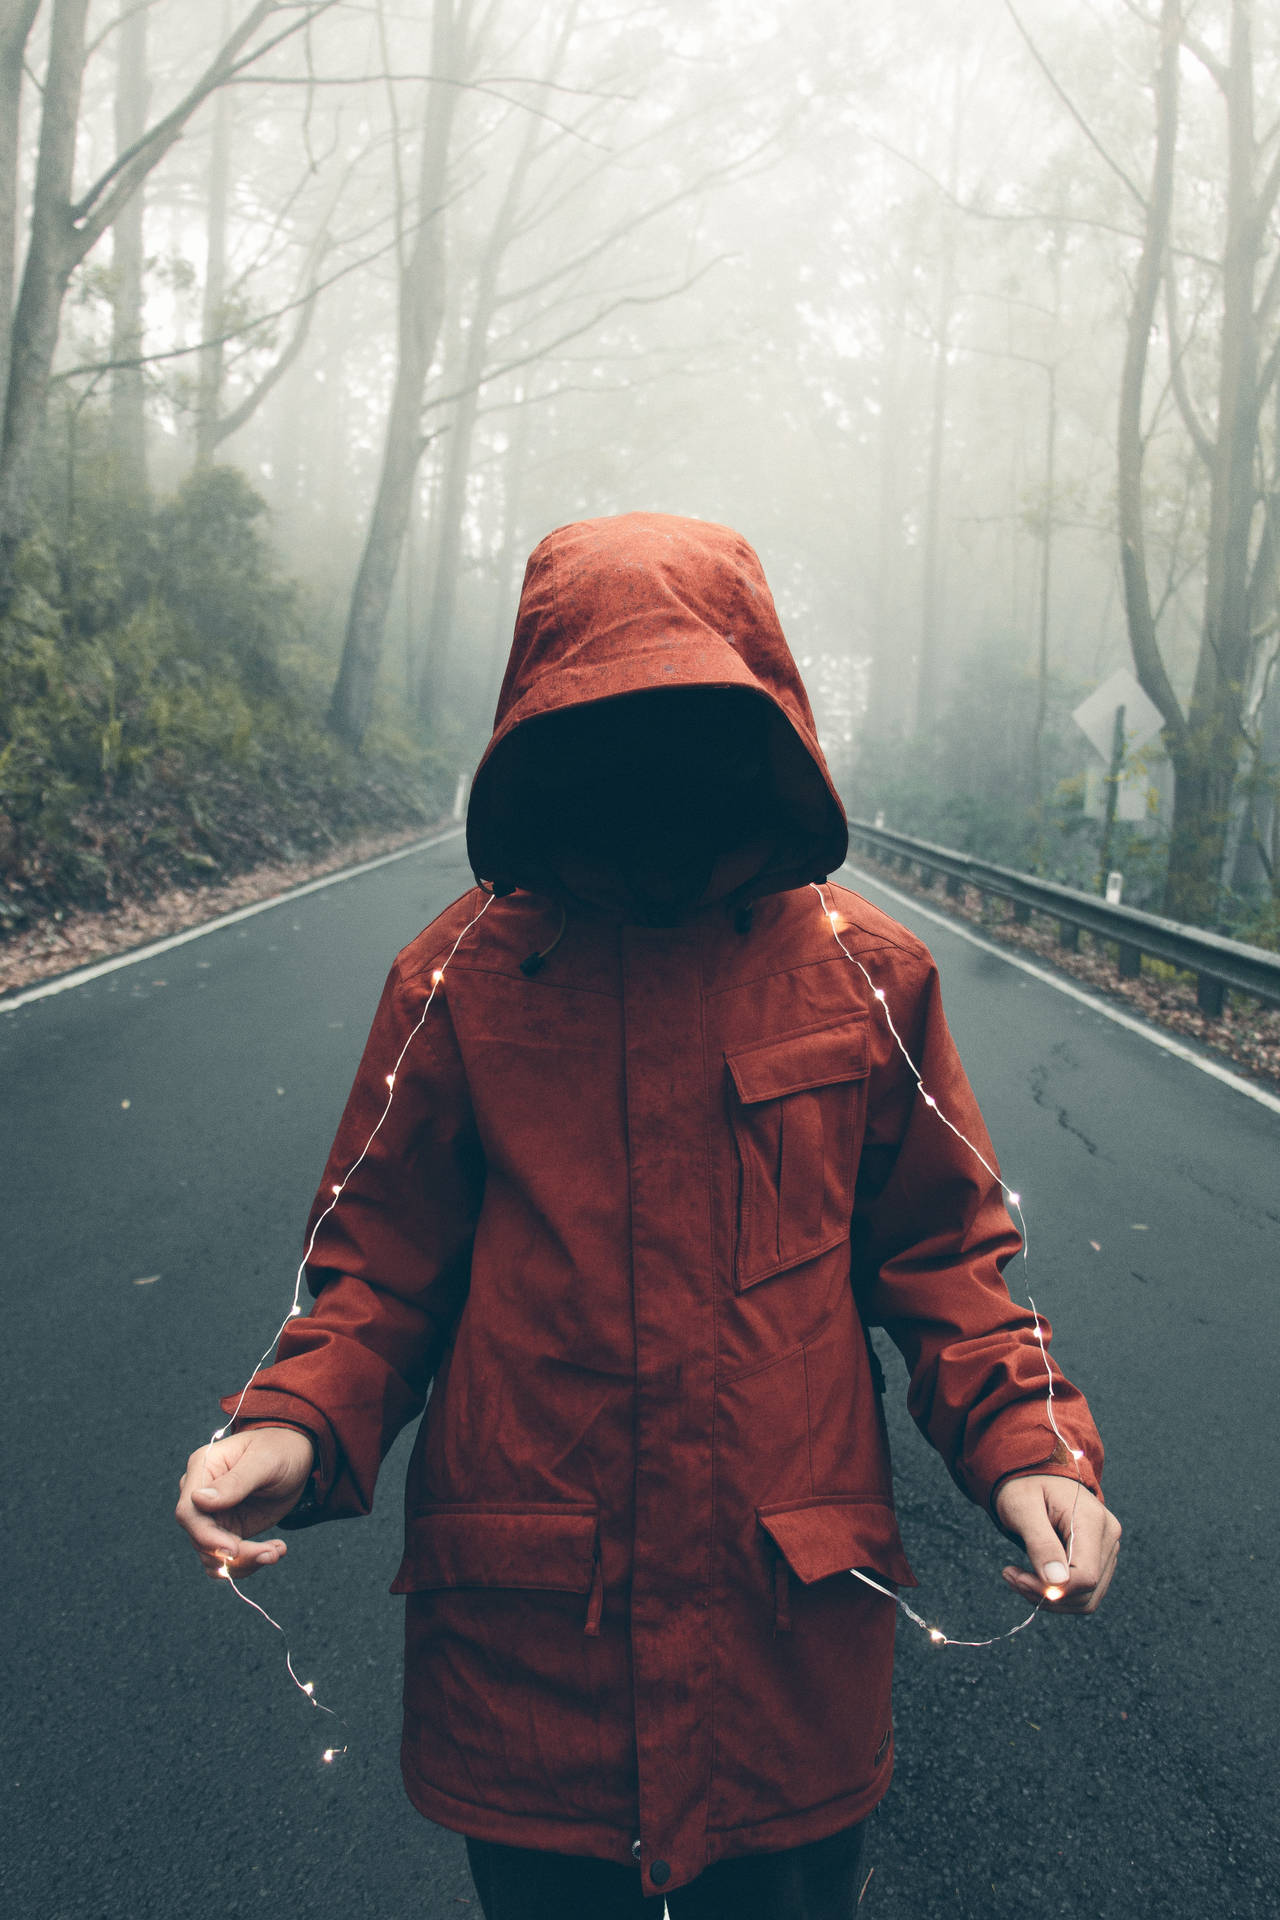 Paranormal Spooky Red Jacket Kid Background